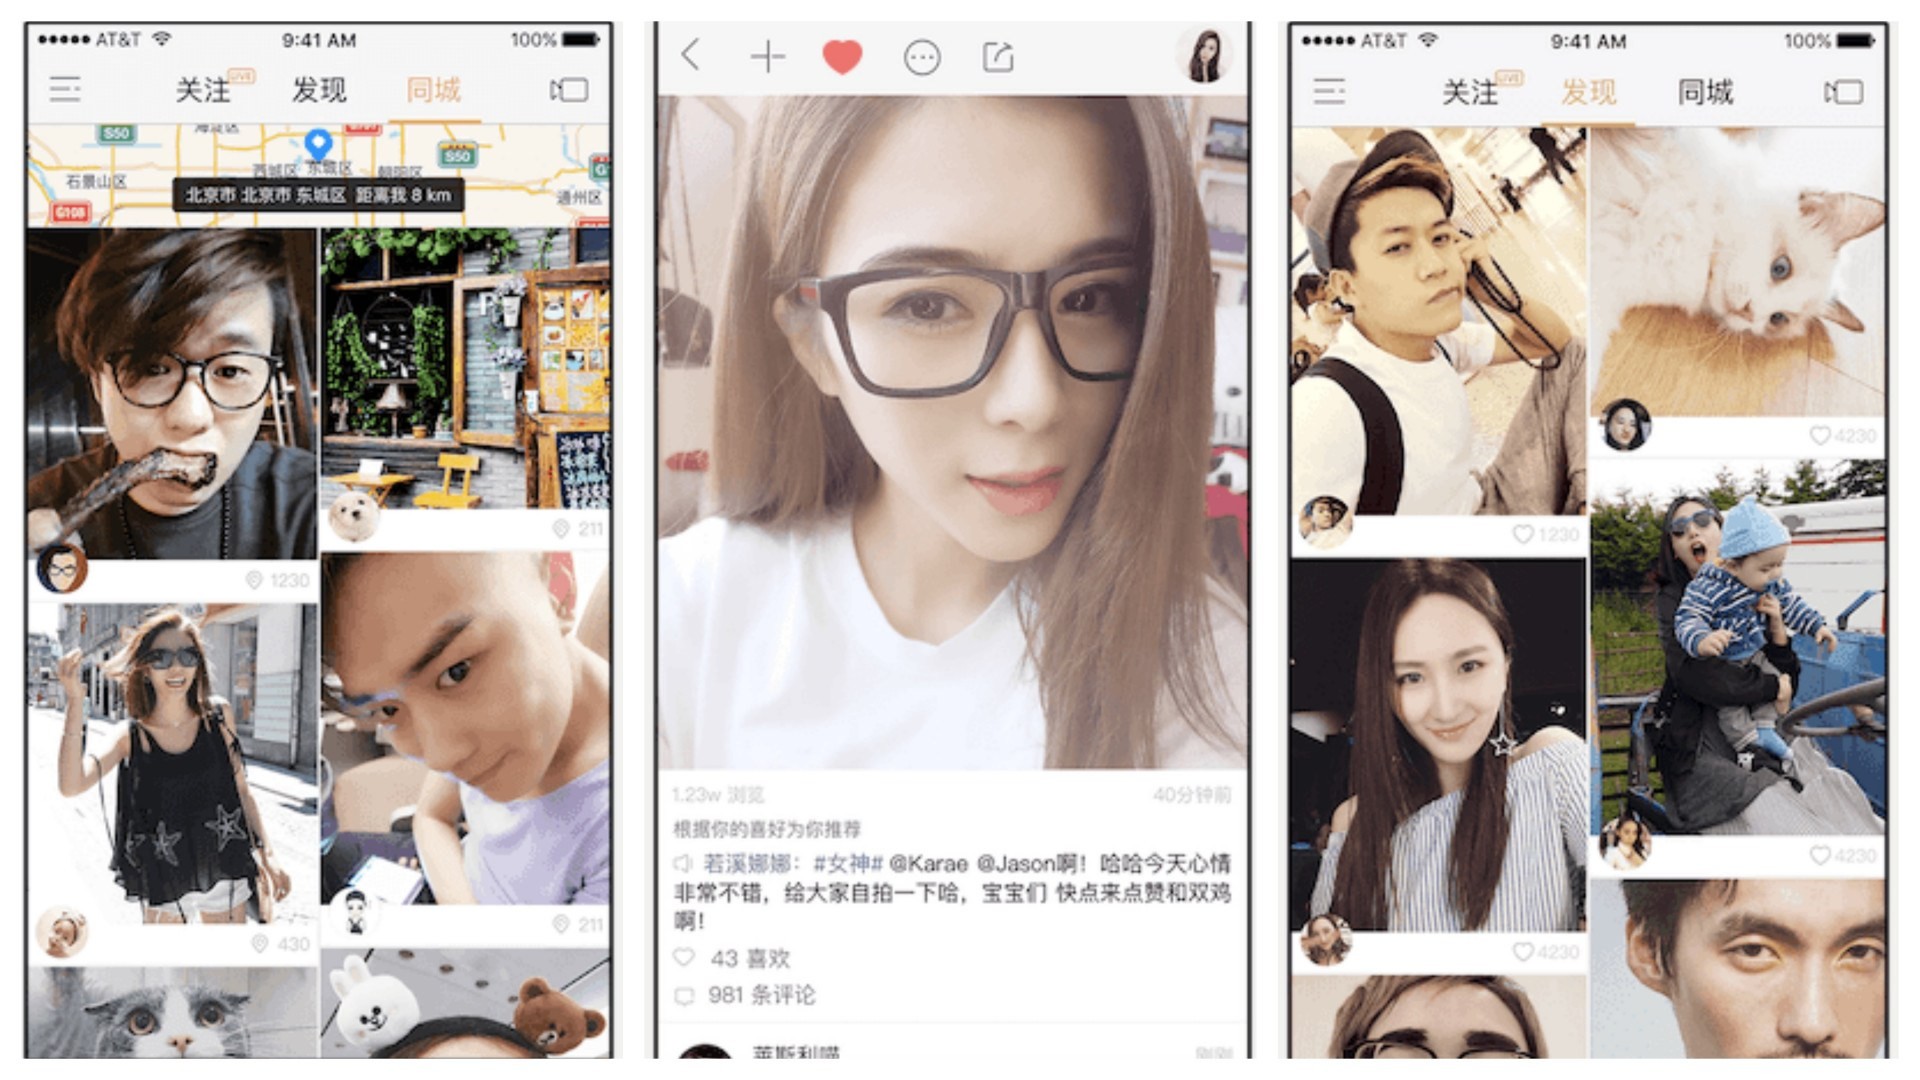 Chinese Short Video Platforms Curb ‘Inappropriate’ Live Drinking Streams